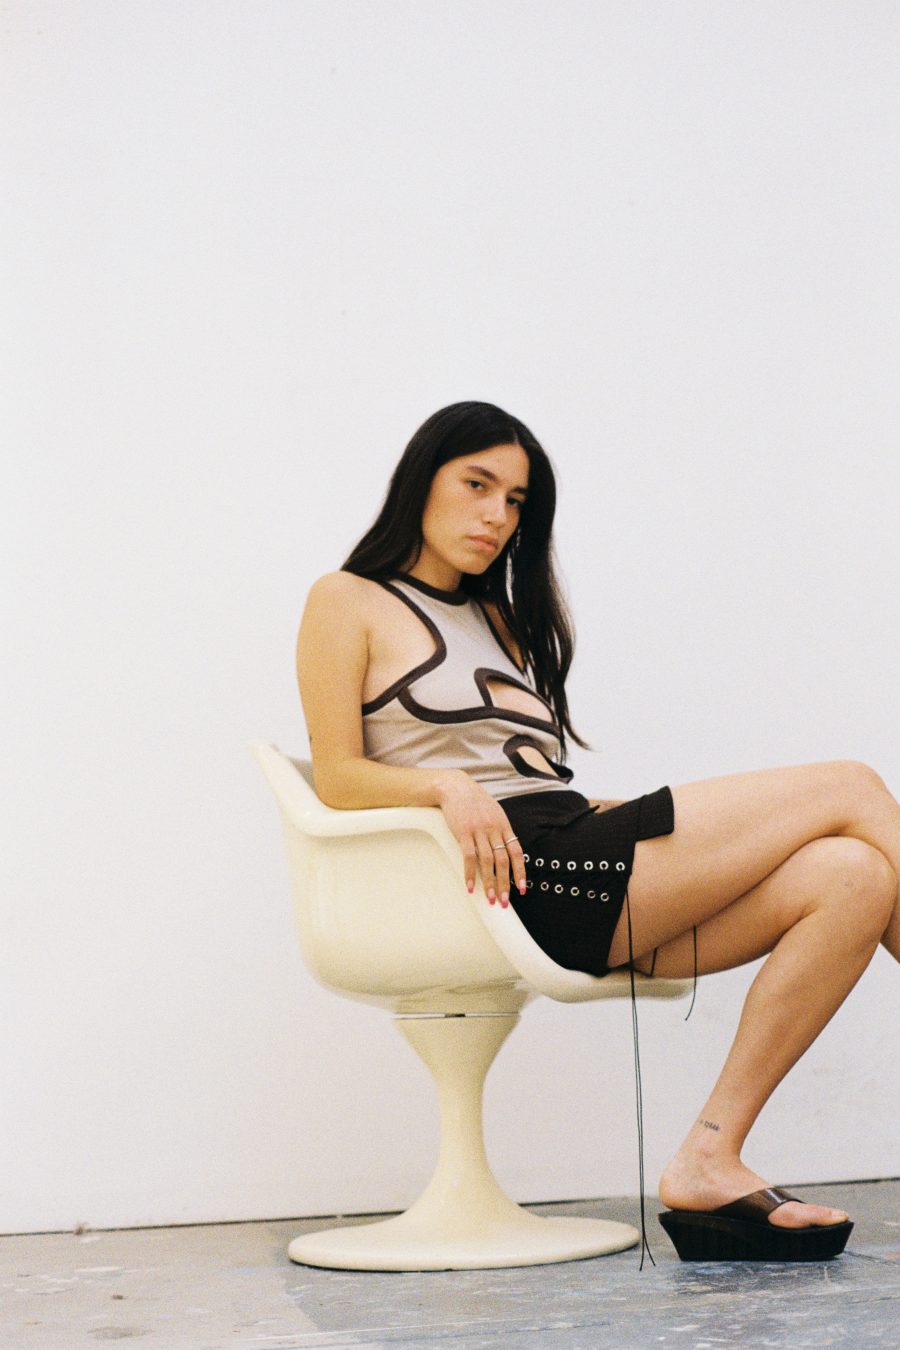 A model sitting in a chair, wearing an outfit by Spitsubishi.